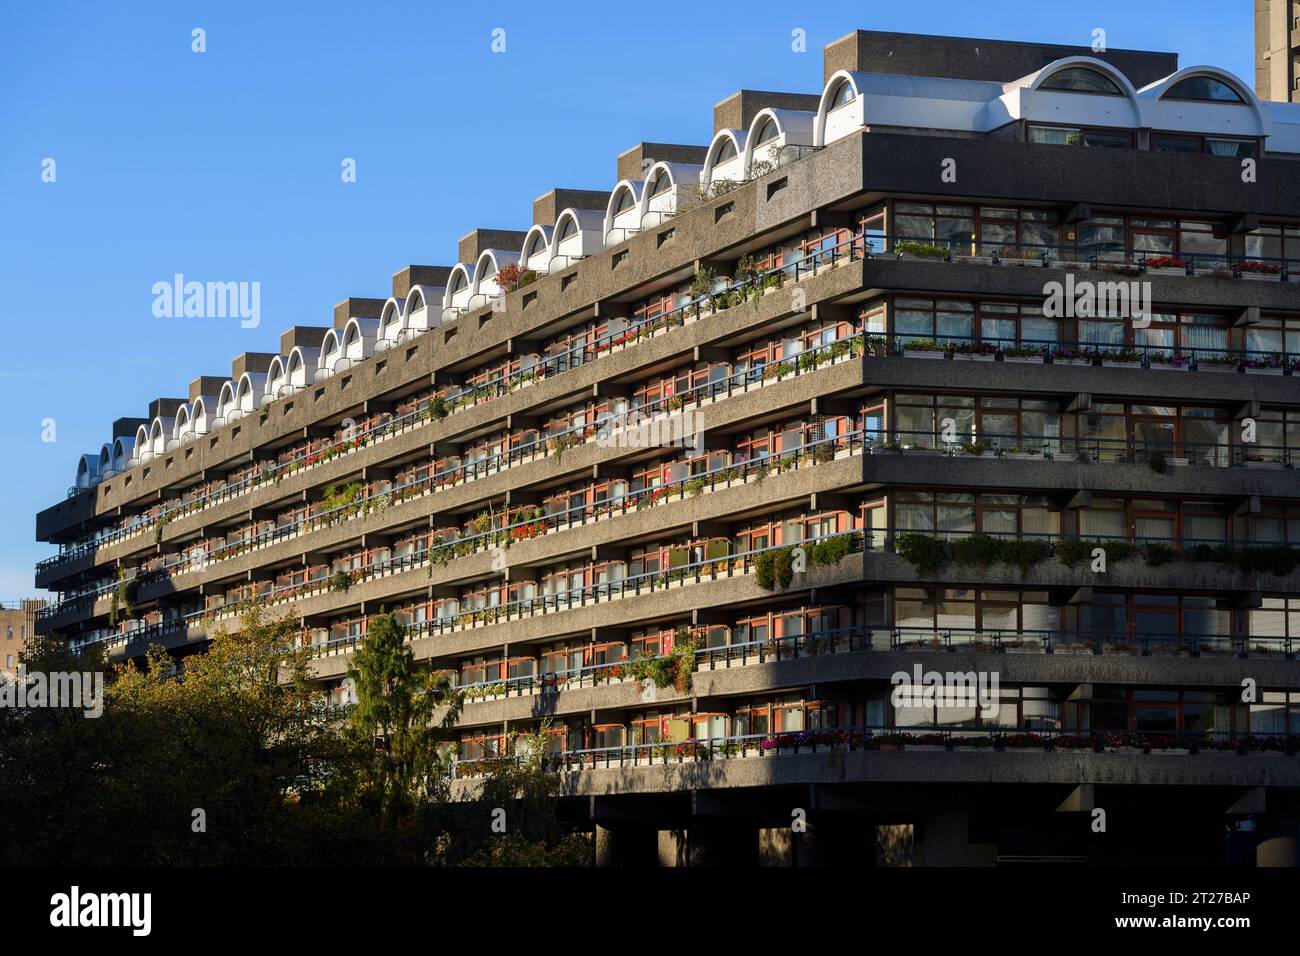 Defoe House a terrace apartment block in the Barbican Estate, was designed by Chamberlin, Powell, and Bon, and is a prominent example of British bruta Stock Photo